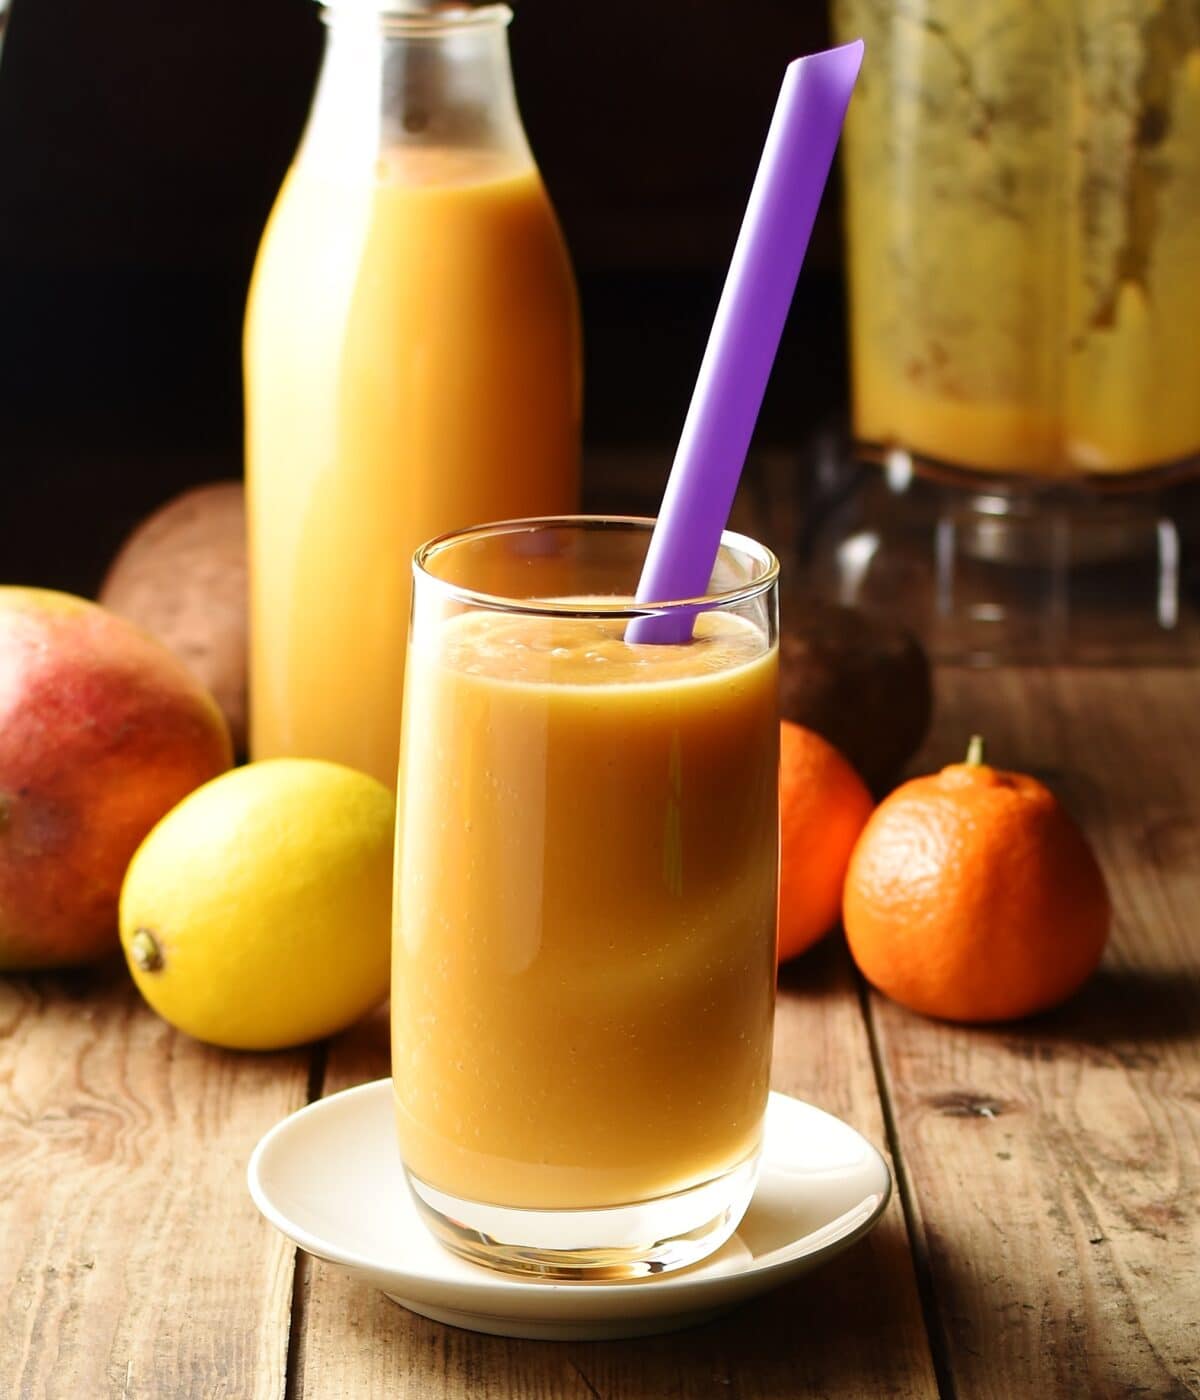 Sweet potato smoothie in glass with purple straw, lemon, tangerine, mango, smoothie in bottle and blender in background.